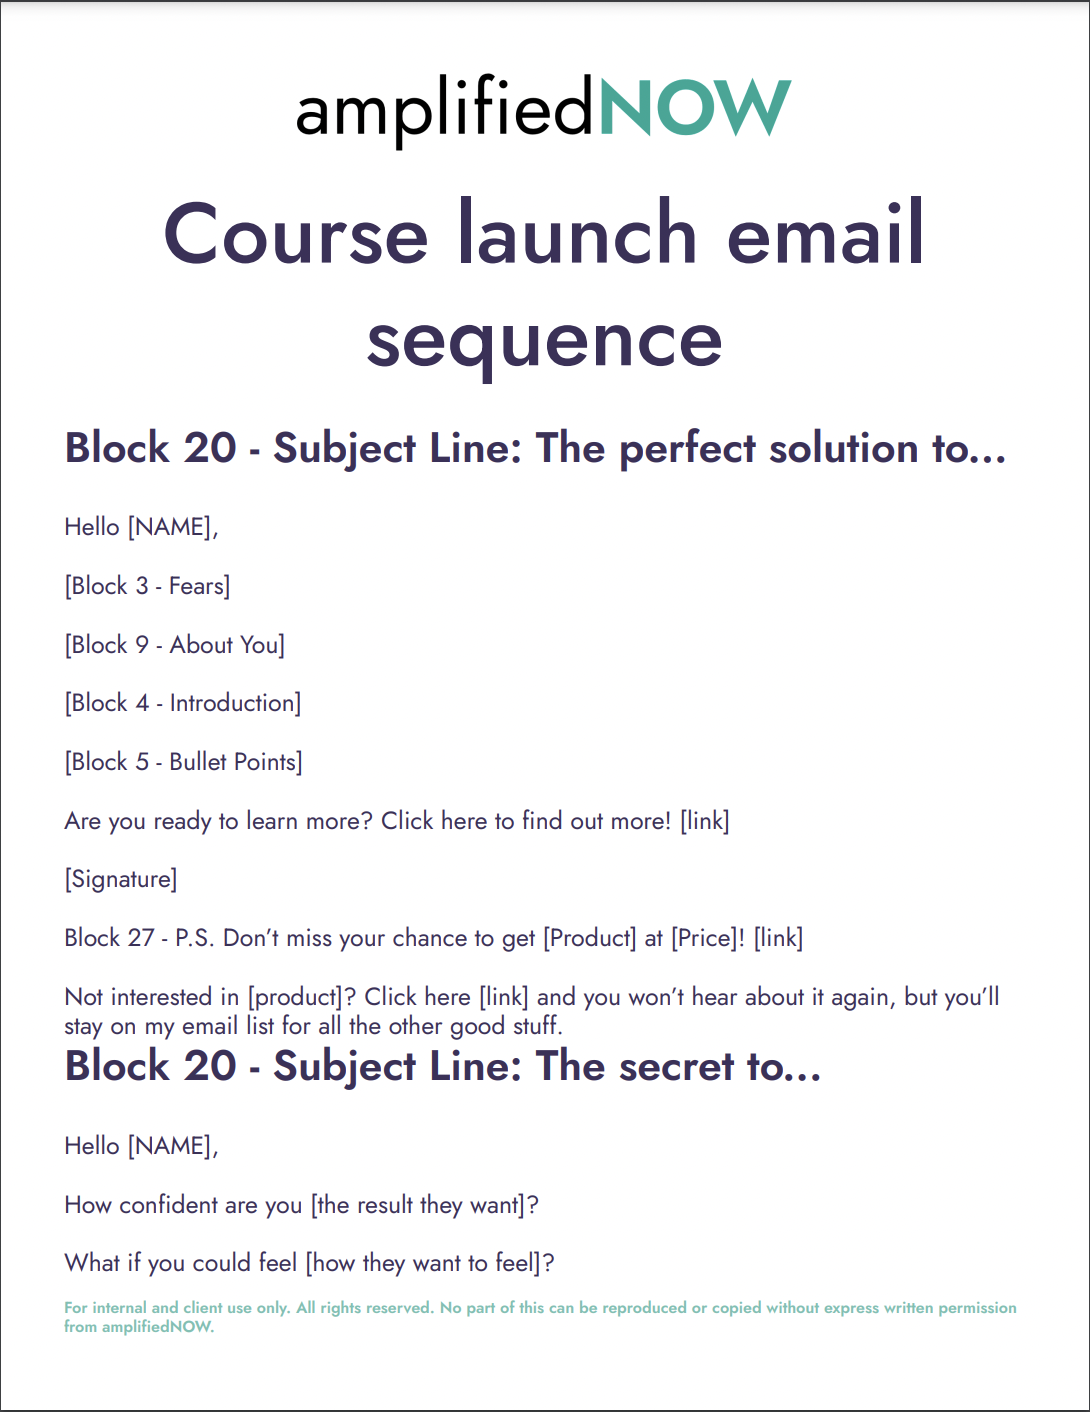 Course launch email sequence